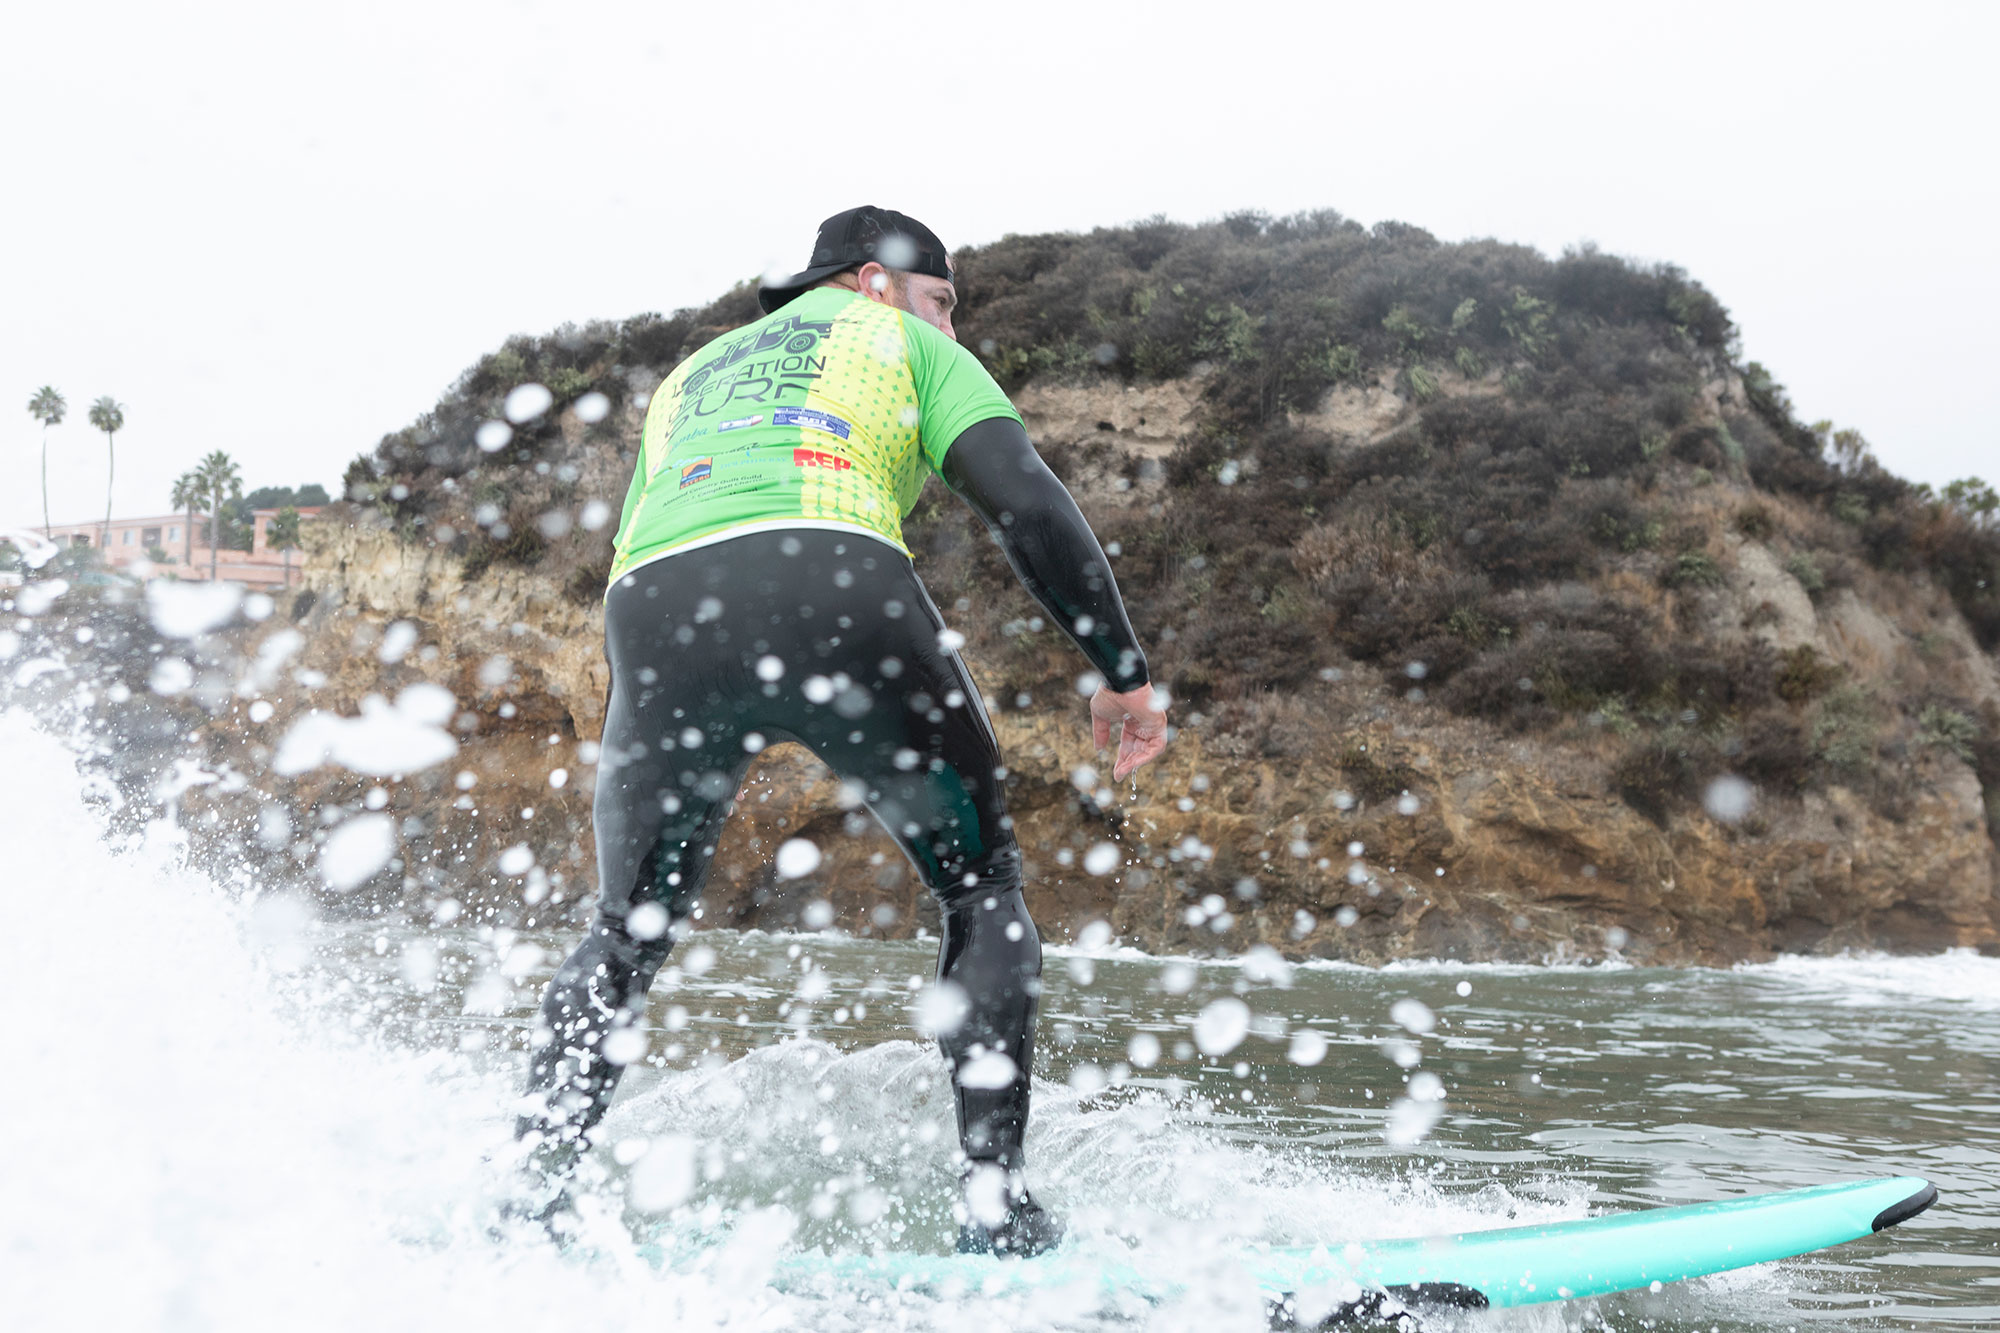 Neil, veteran, surfing with operation surf